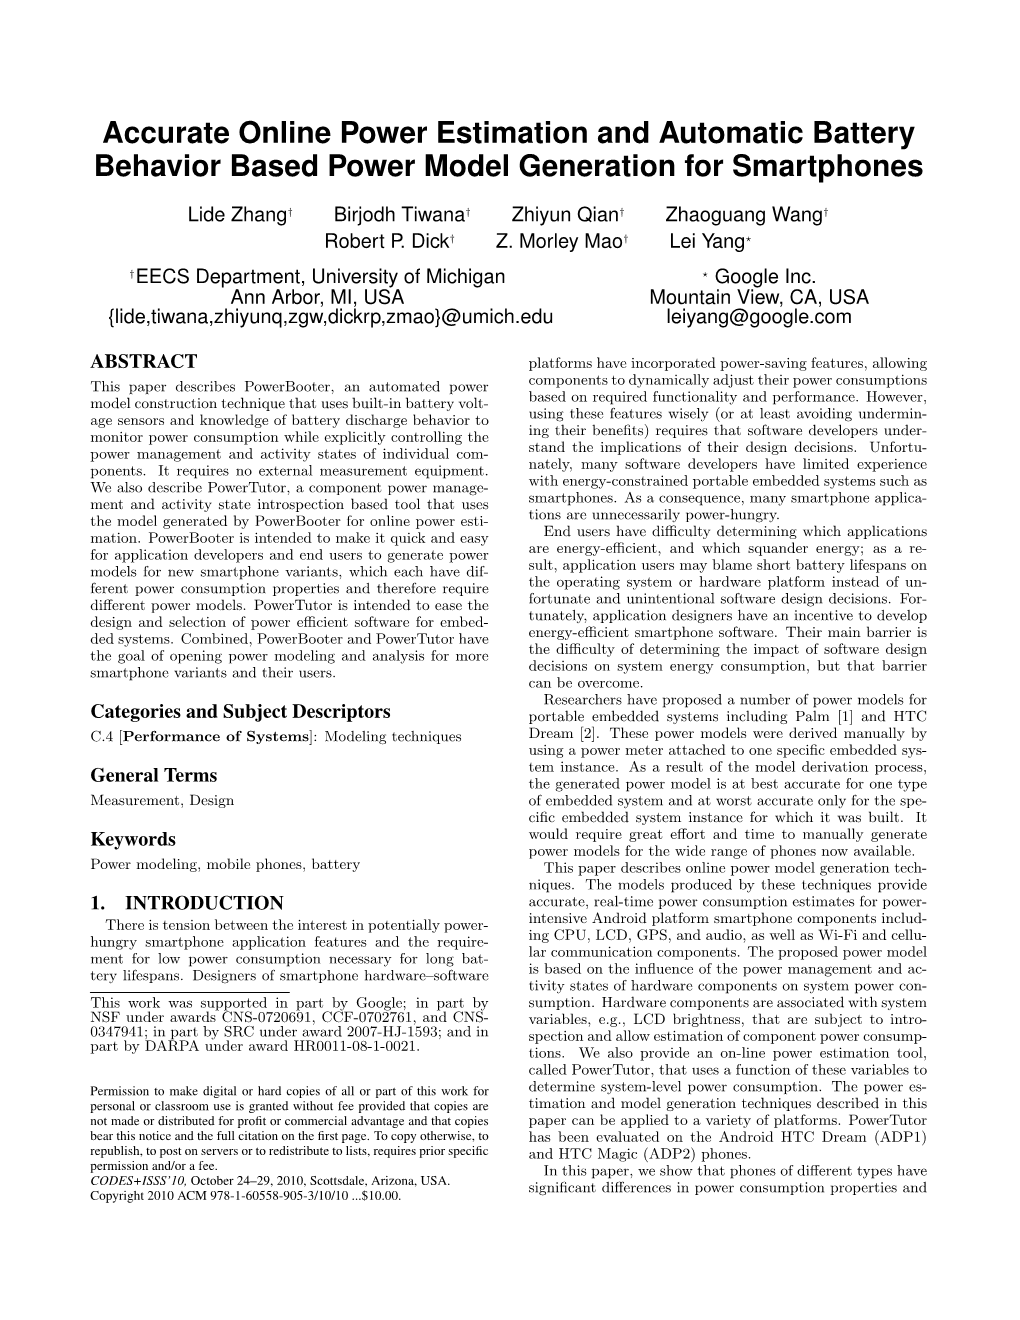 Accurate Online Power Estimation and Automatic Battery Behavior Based Power Model Generation for Smartphones